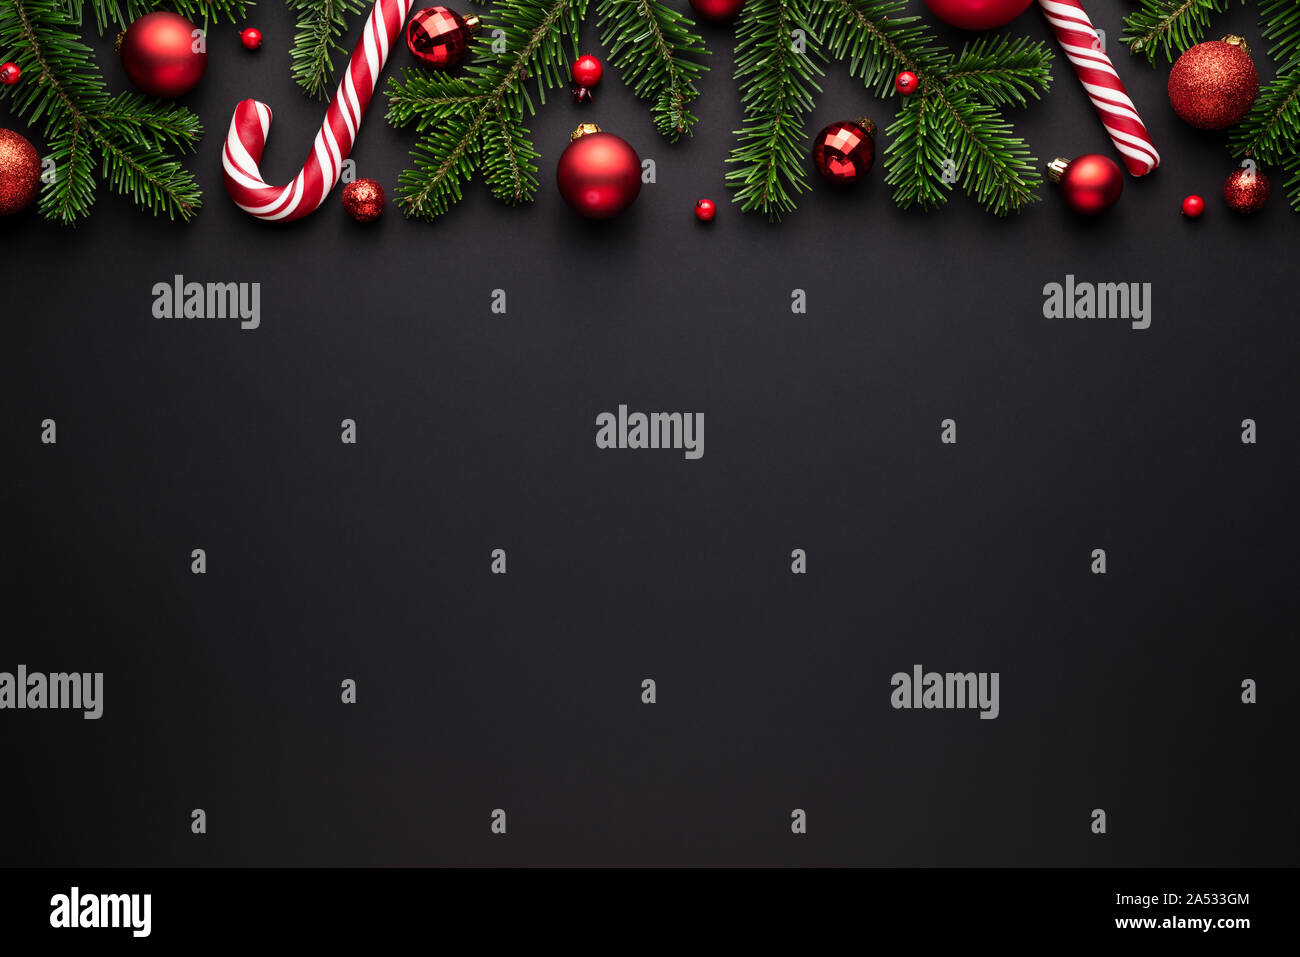 Black christmas background. Festive border of fir branches, Christmas balls and candy canes Stock Photo